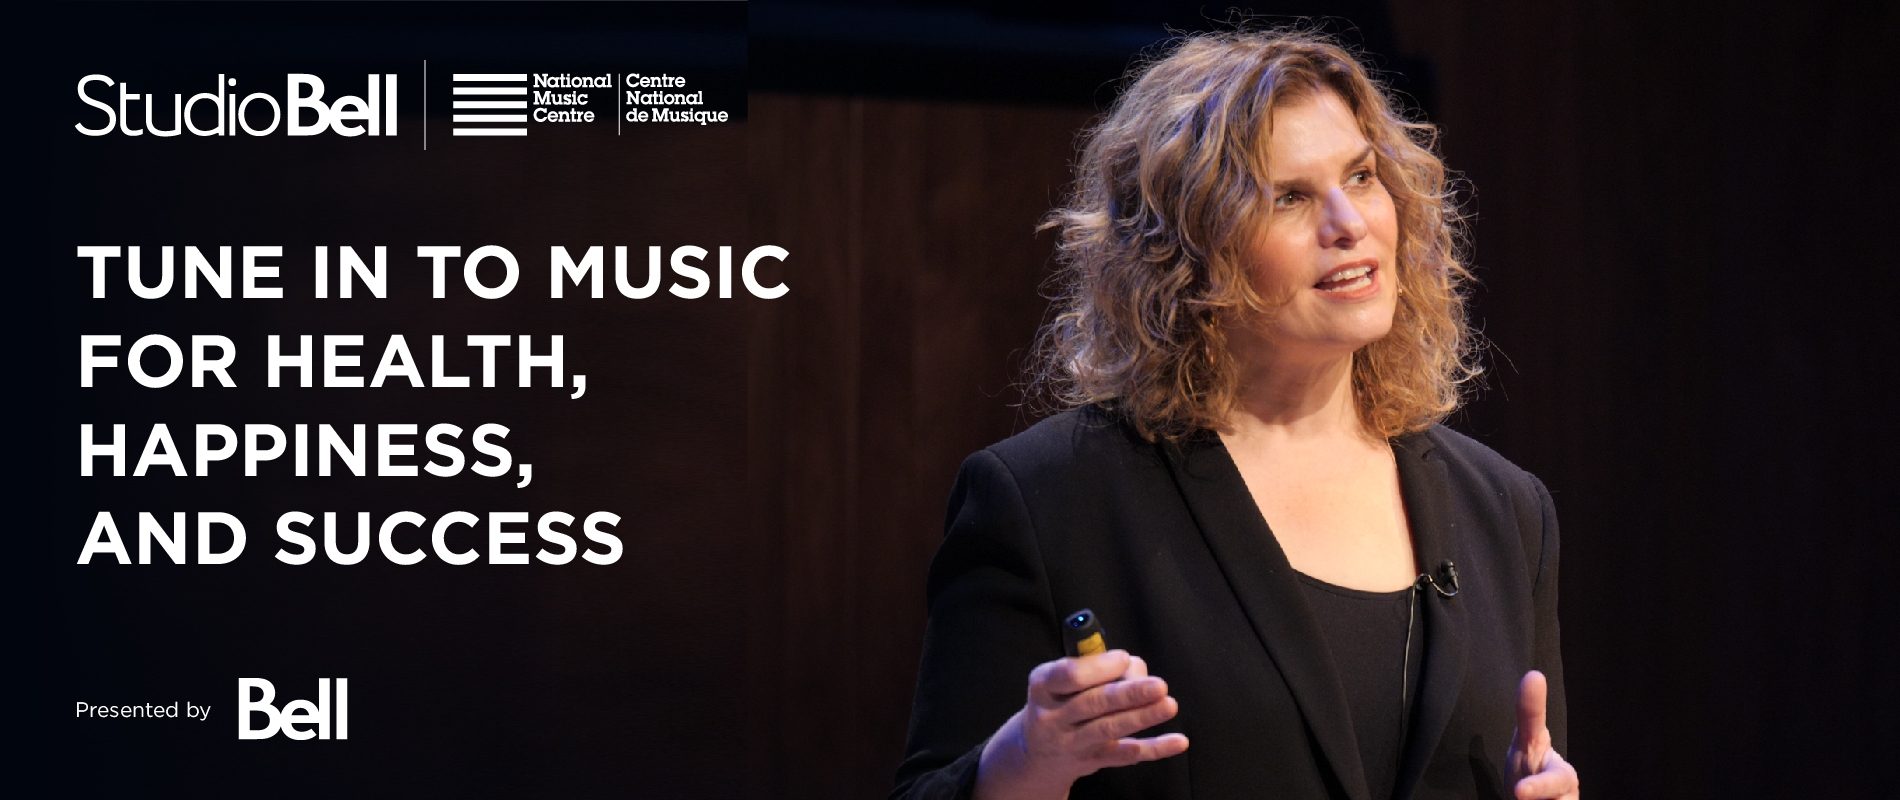 National Music Centre Announces New Music & Wellness Series for Professionals, Led by Renowned Music Therapist Jennifer Buchanan